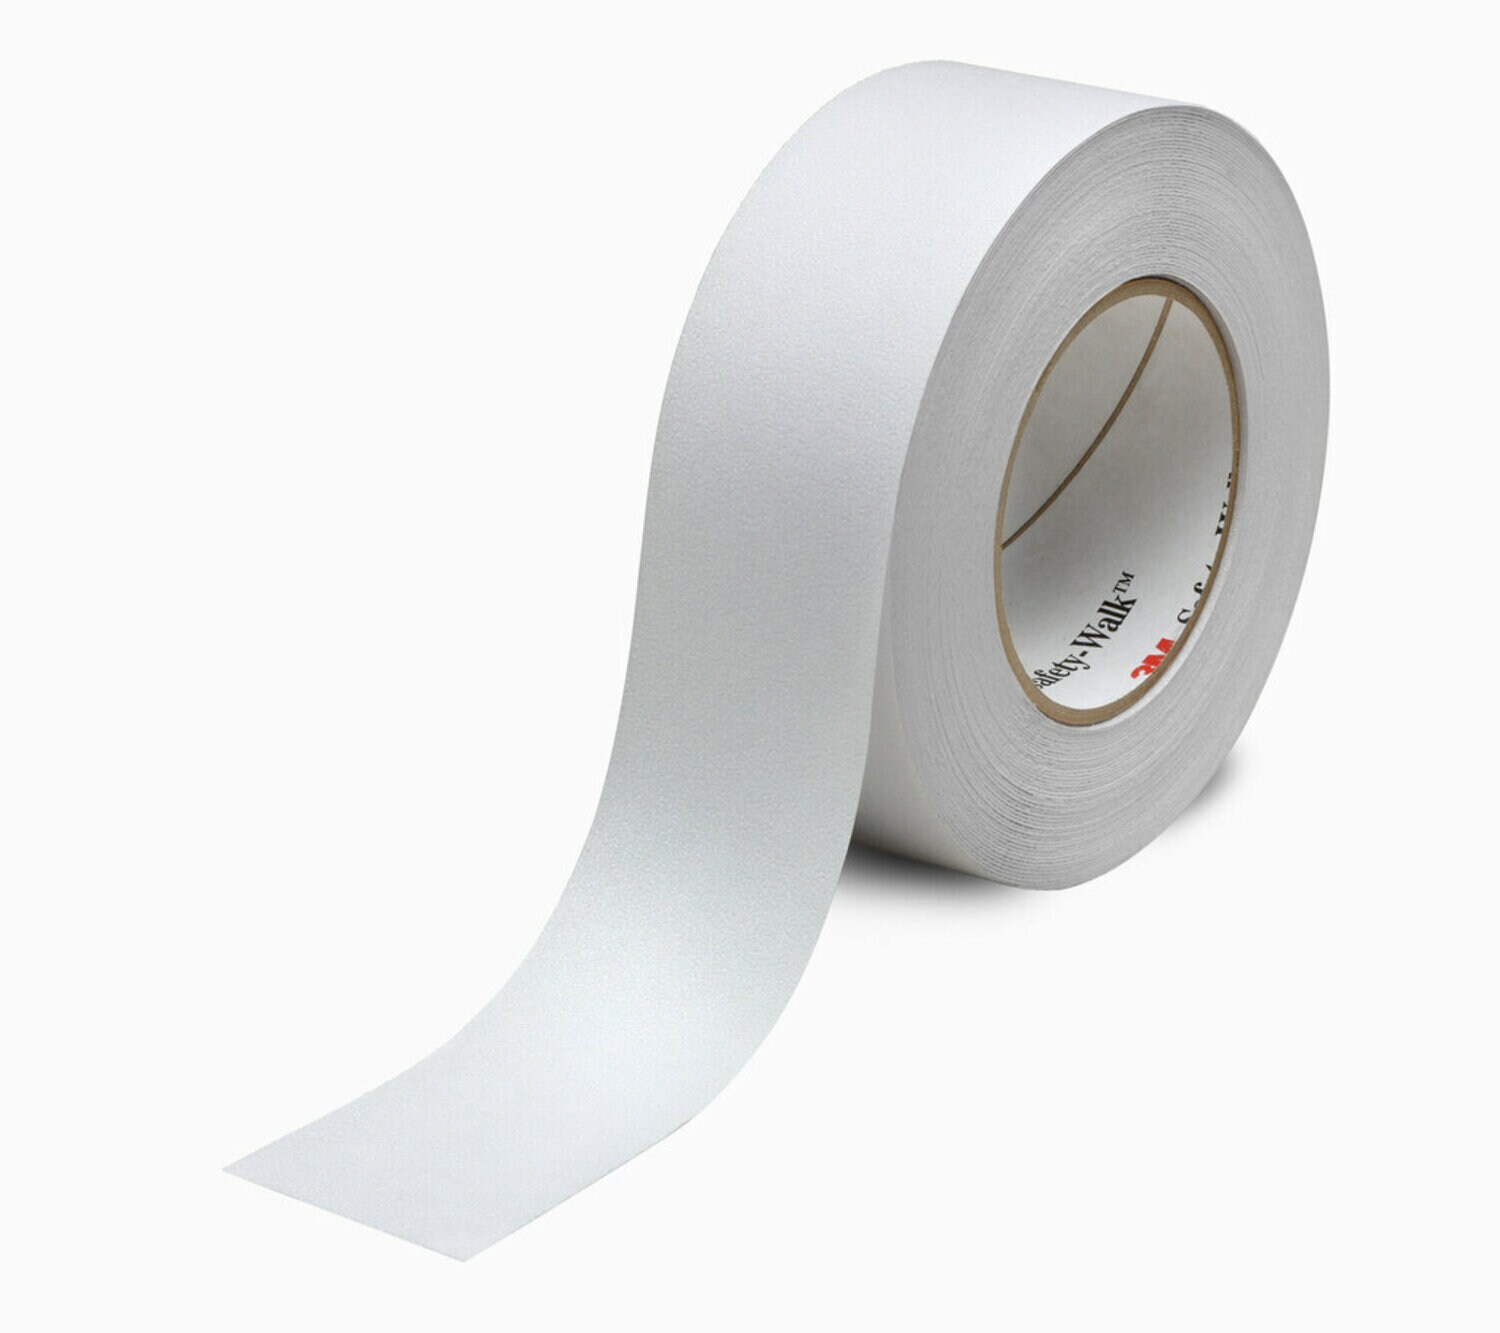 7000001996 - 3M Safety-Walk Slip-Resistant Fine Resilient Tapes & Treads 220,
Clear, 2 in x 60 ft, Roll, 2/Case